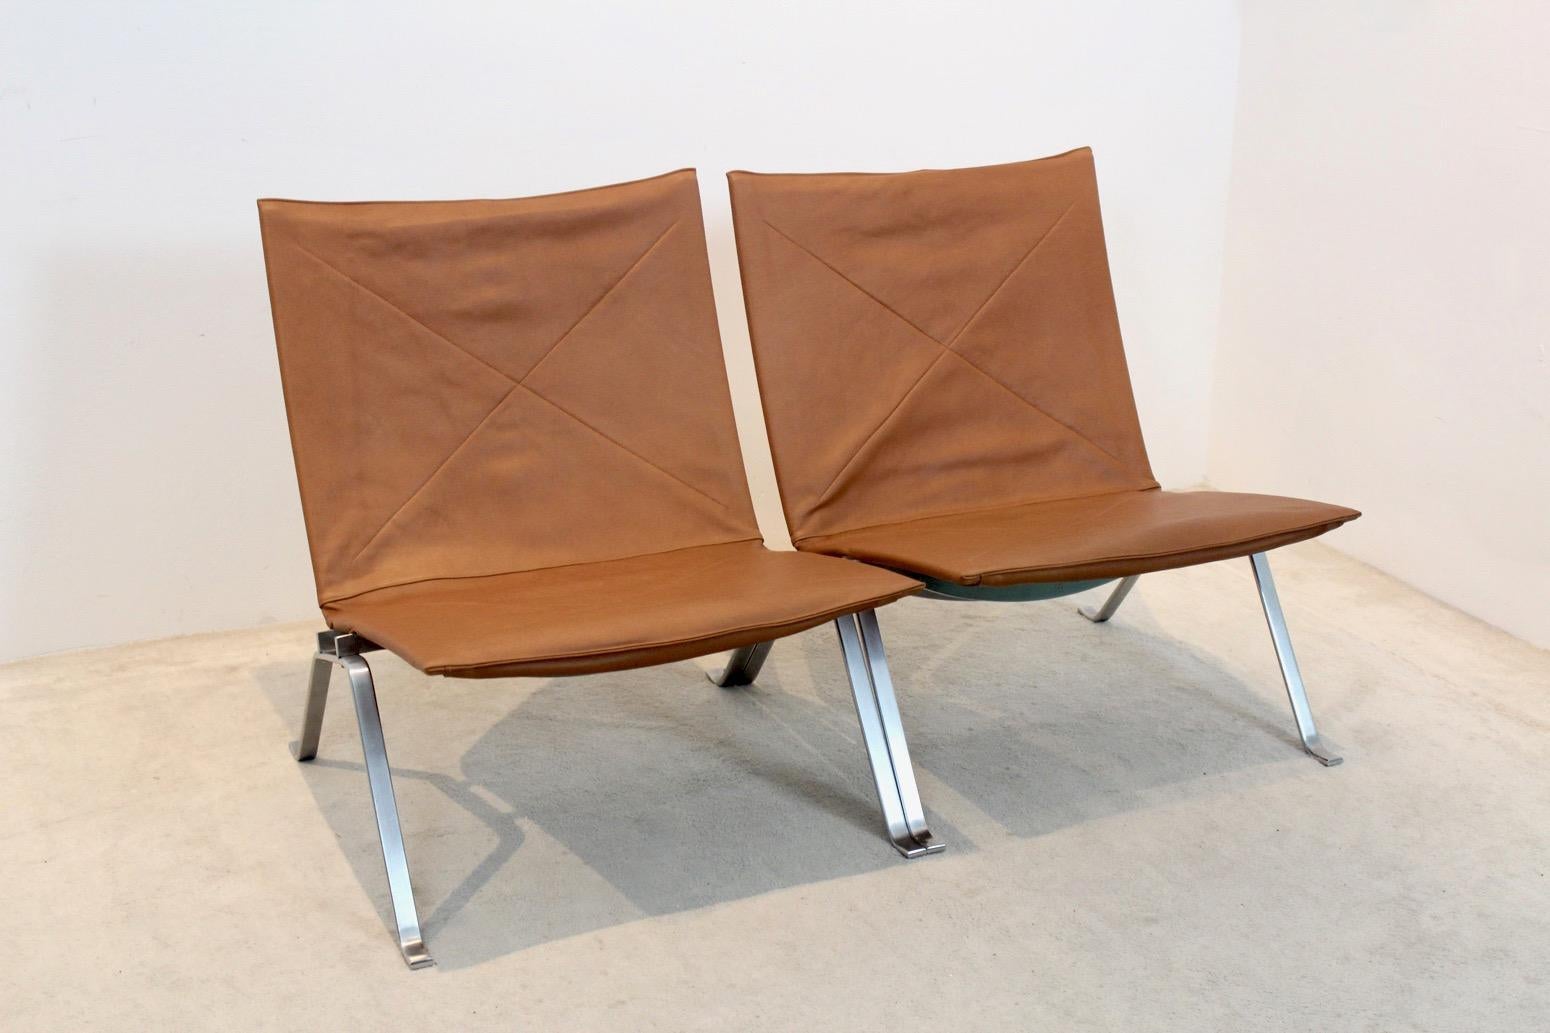 Exquisite Cognac Leather PK22 chairs by Poul Kjærholm for E. Kold Christensen For Sale 7